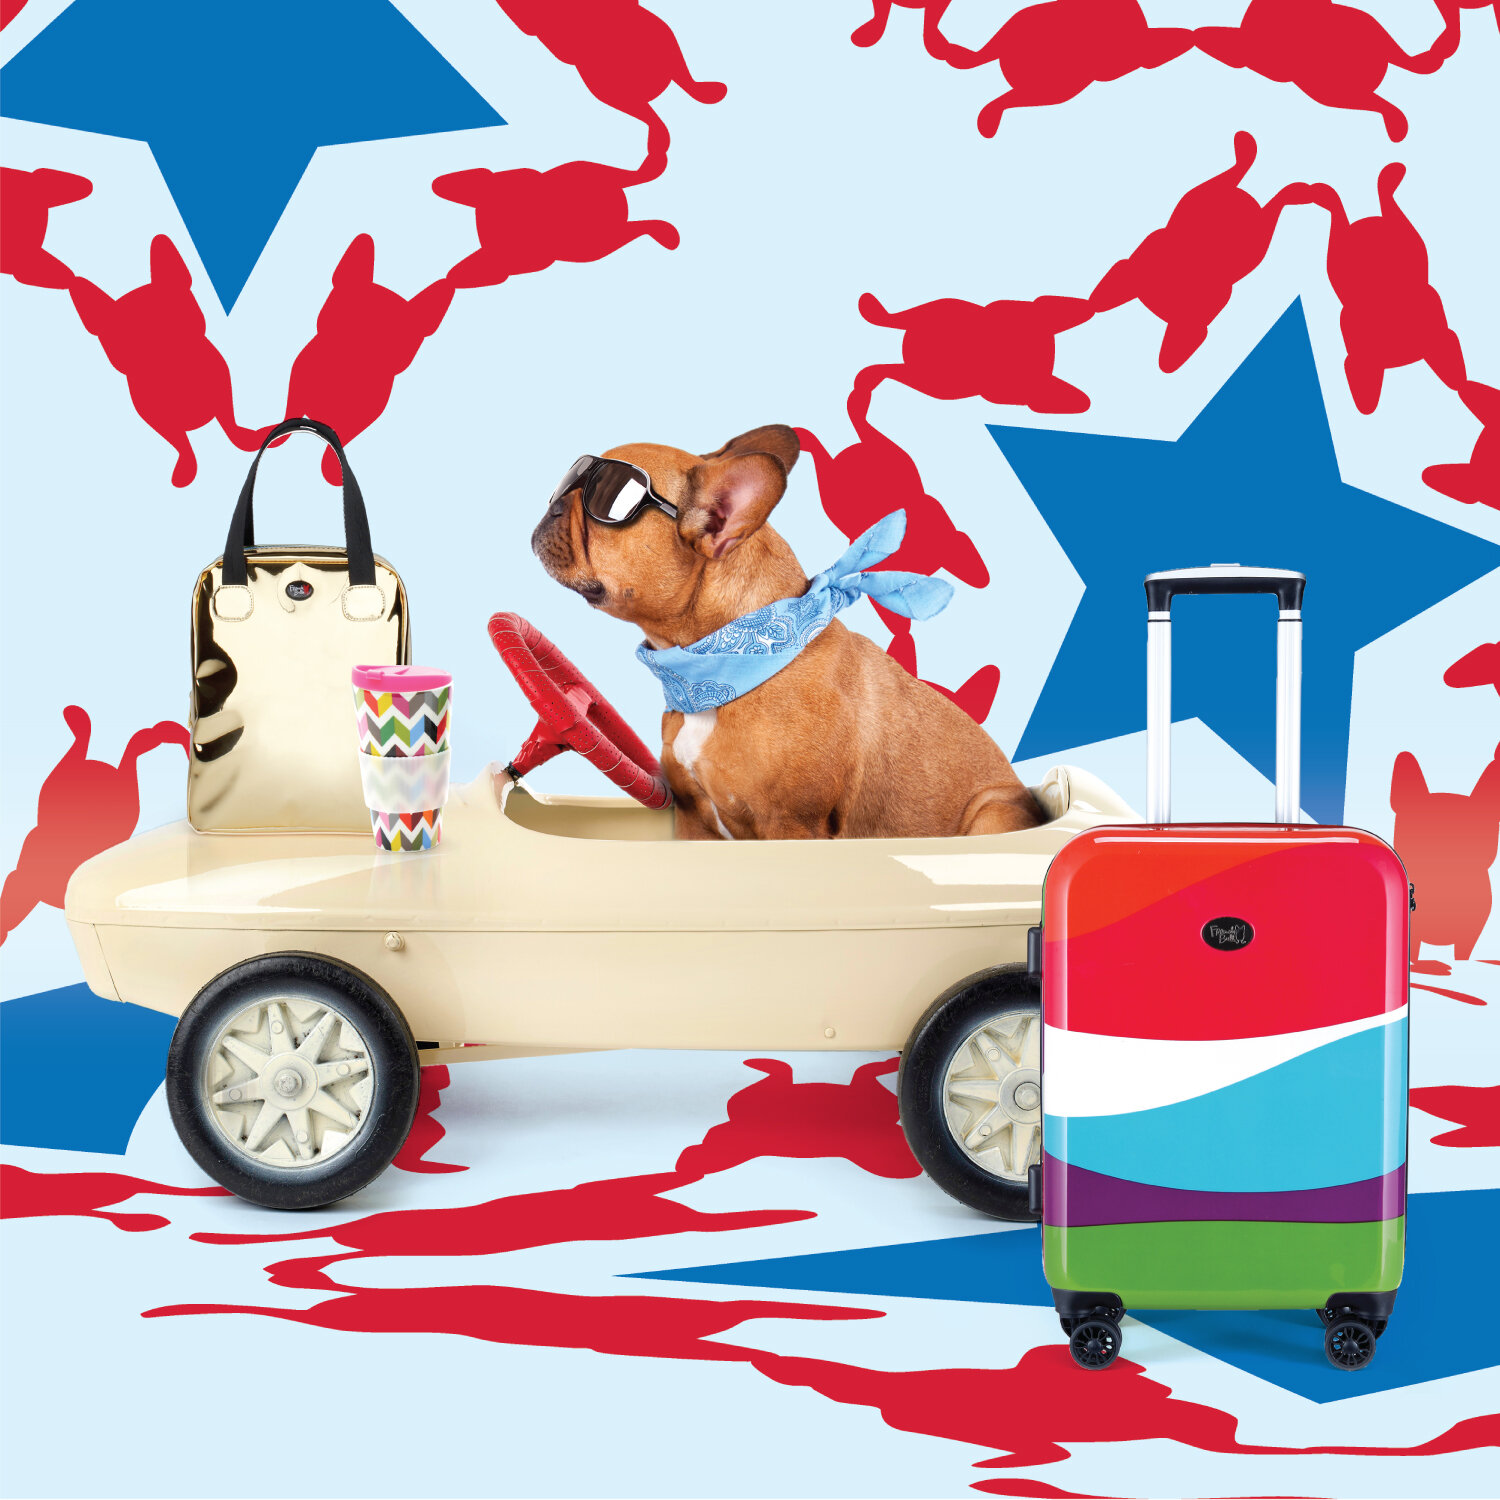  Composite image of French Bull’s lunch bag, thermos, luggage, pattern background and stock image using Photoshop and Illustrator 